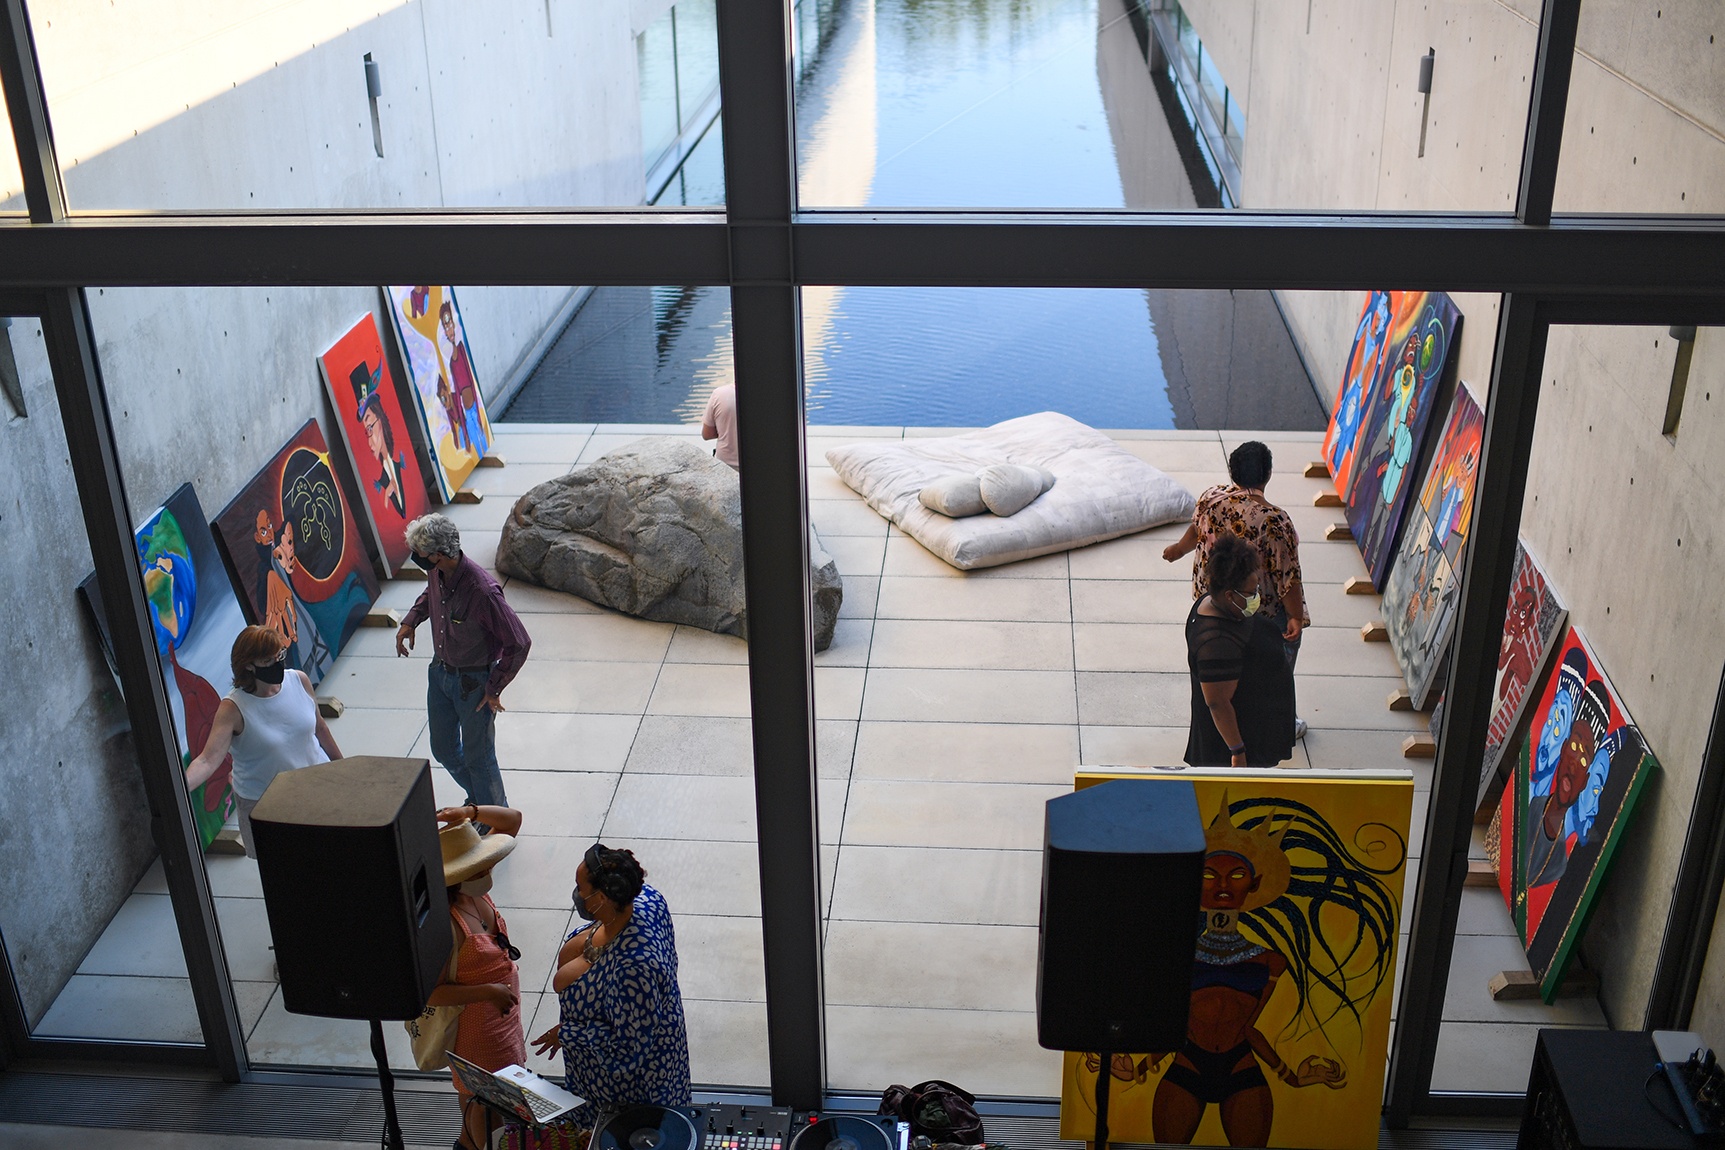 View of the museum water court, with people socializing amongst a pop-up exhibition